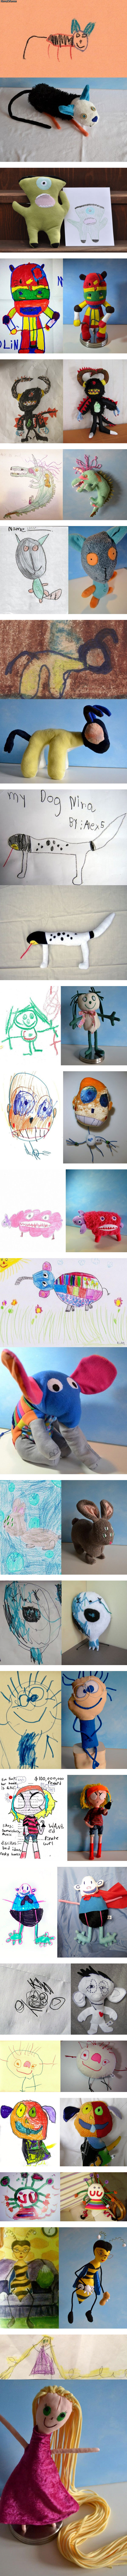 if_childrens_drawings_were_made_into_toys.jpg